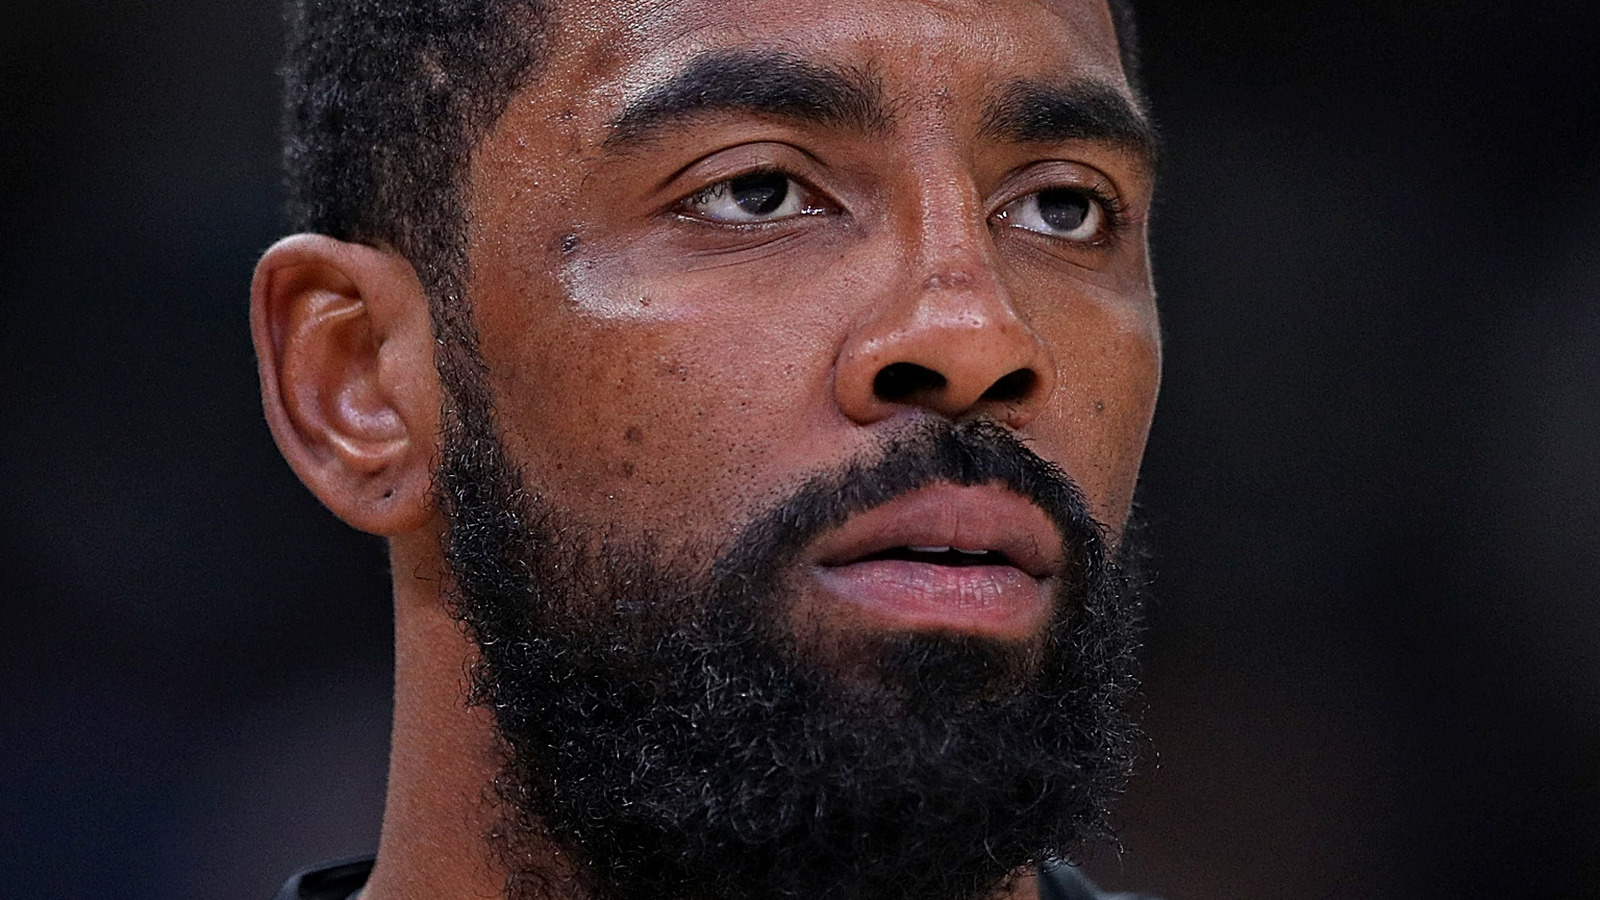 Kyrie Irving Breaks His Silence On Offensive Post With Hefty Donation